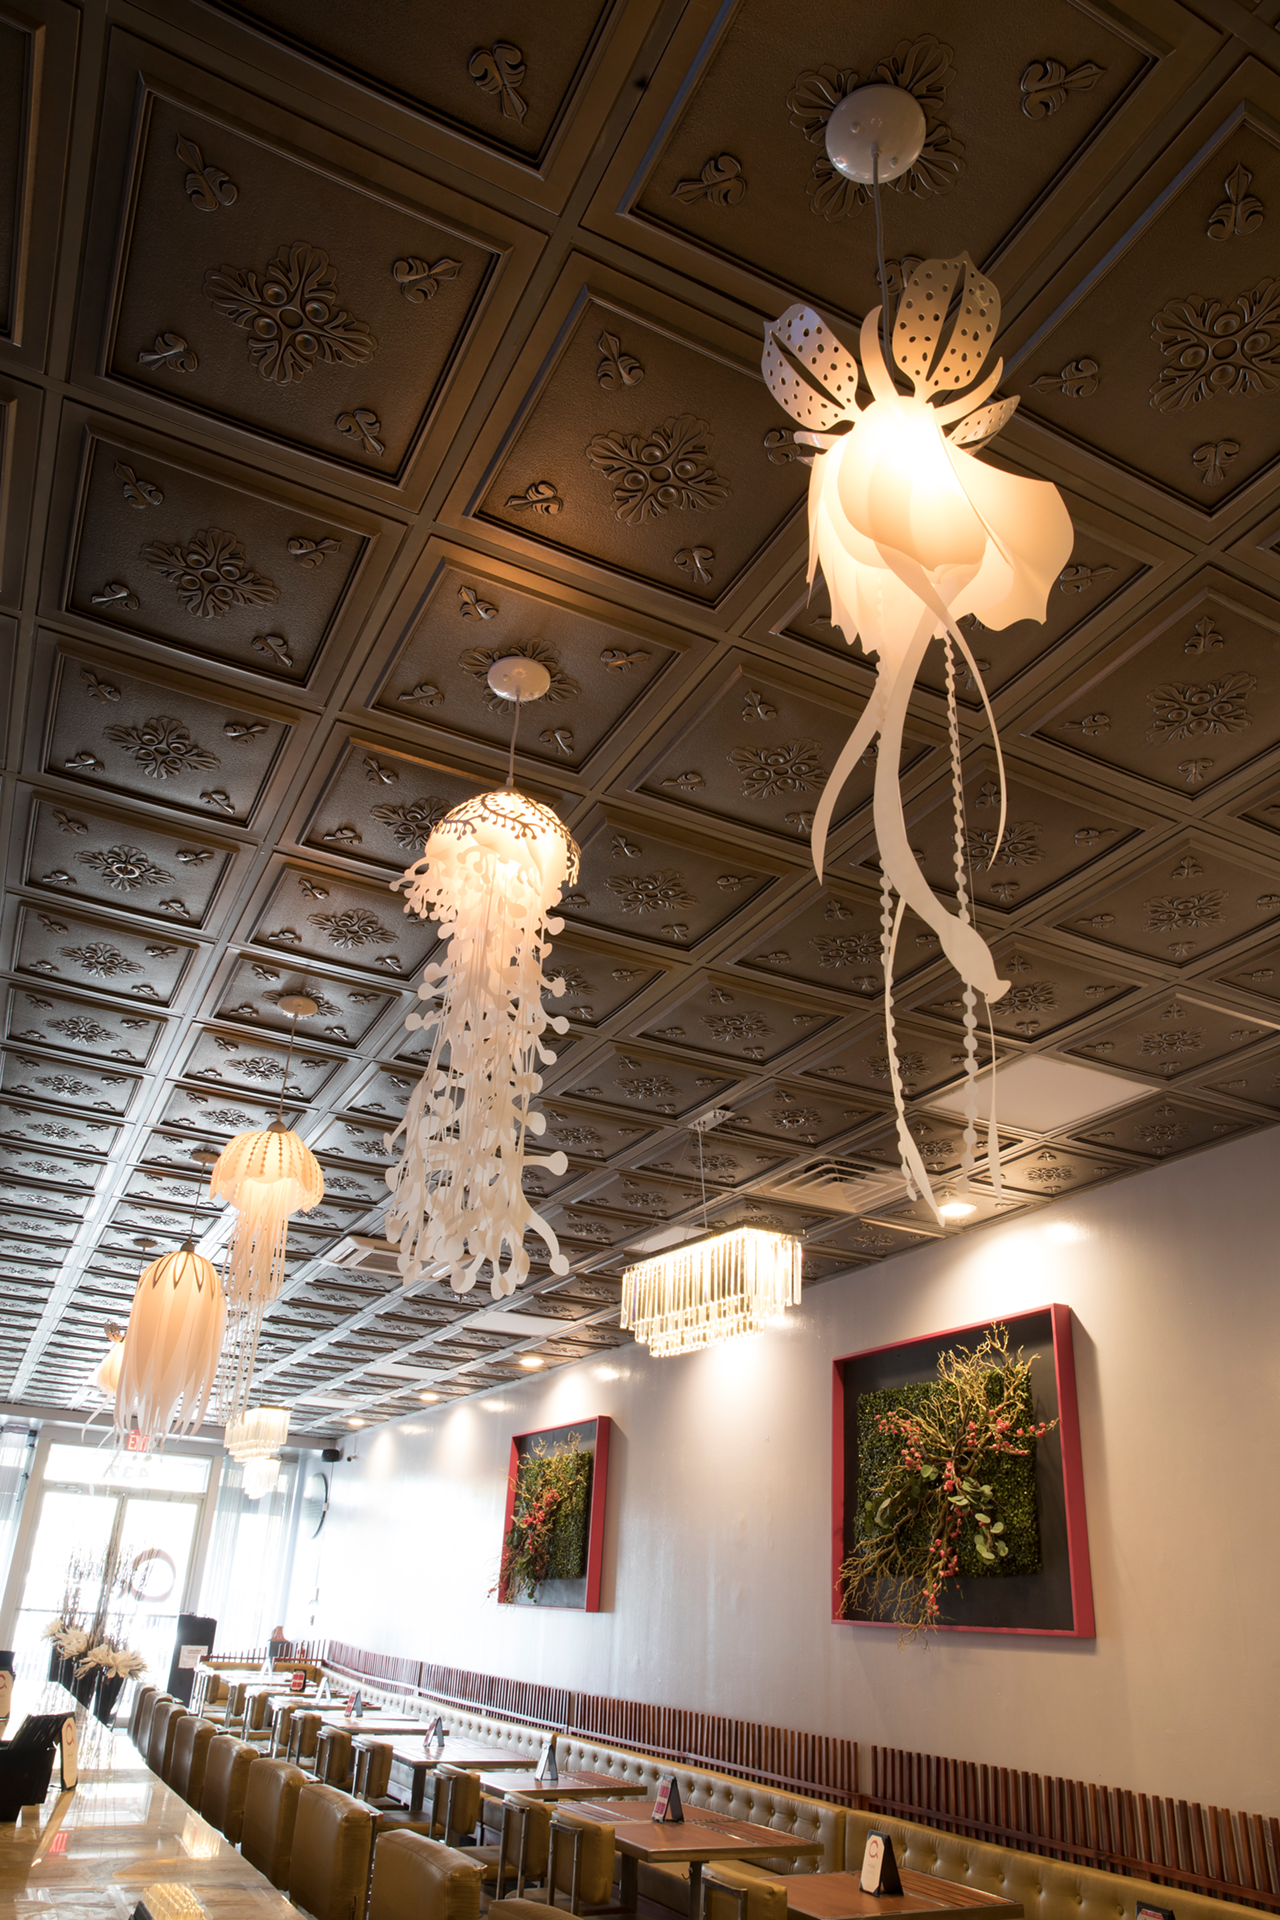 There's a series of glowing pendant lights over the bar that resemble backlit jellyfish in an aquarium.